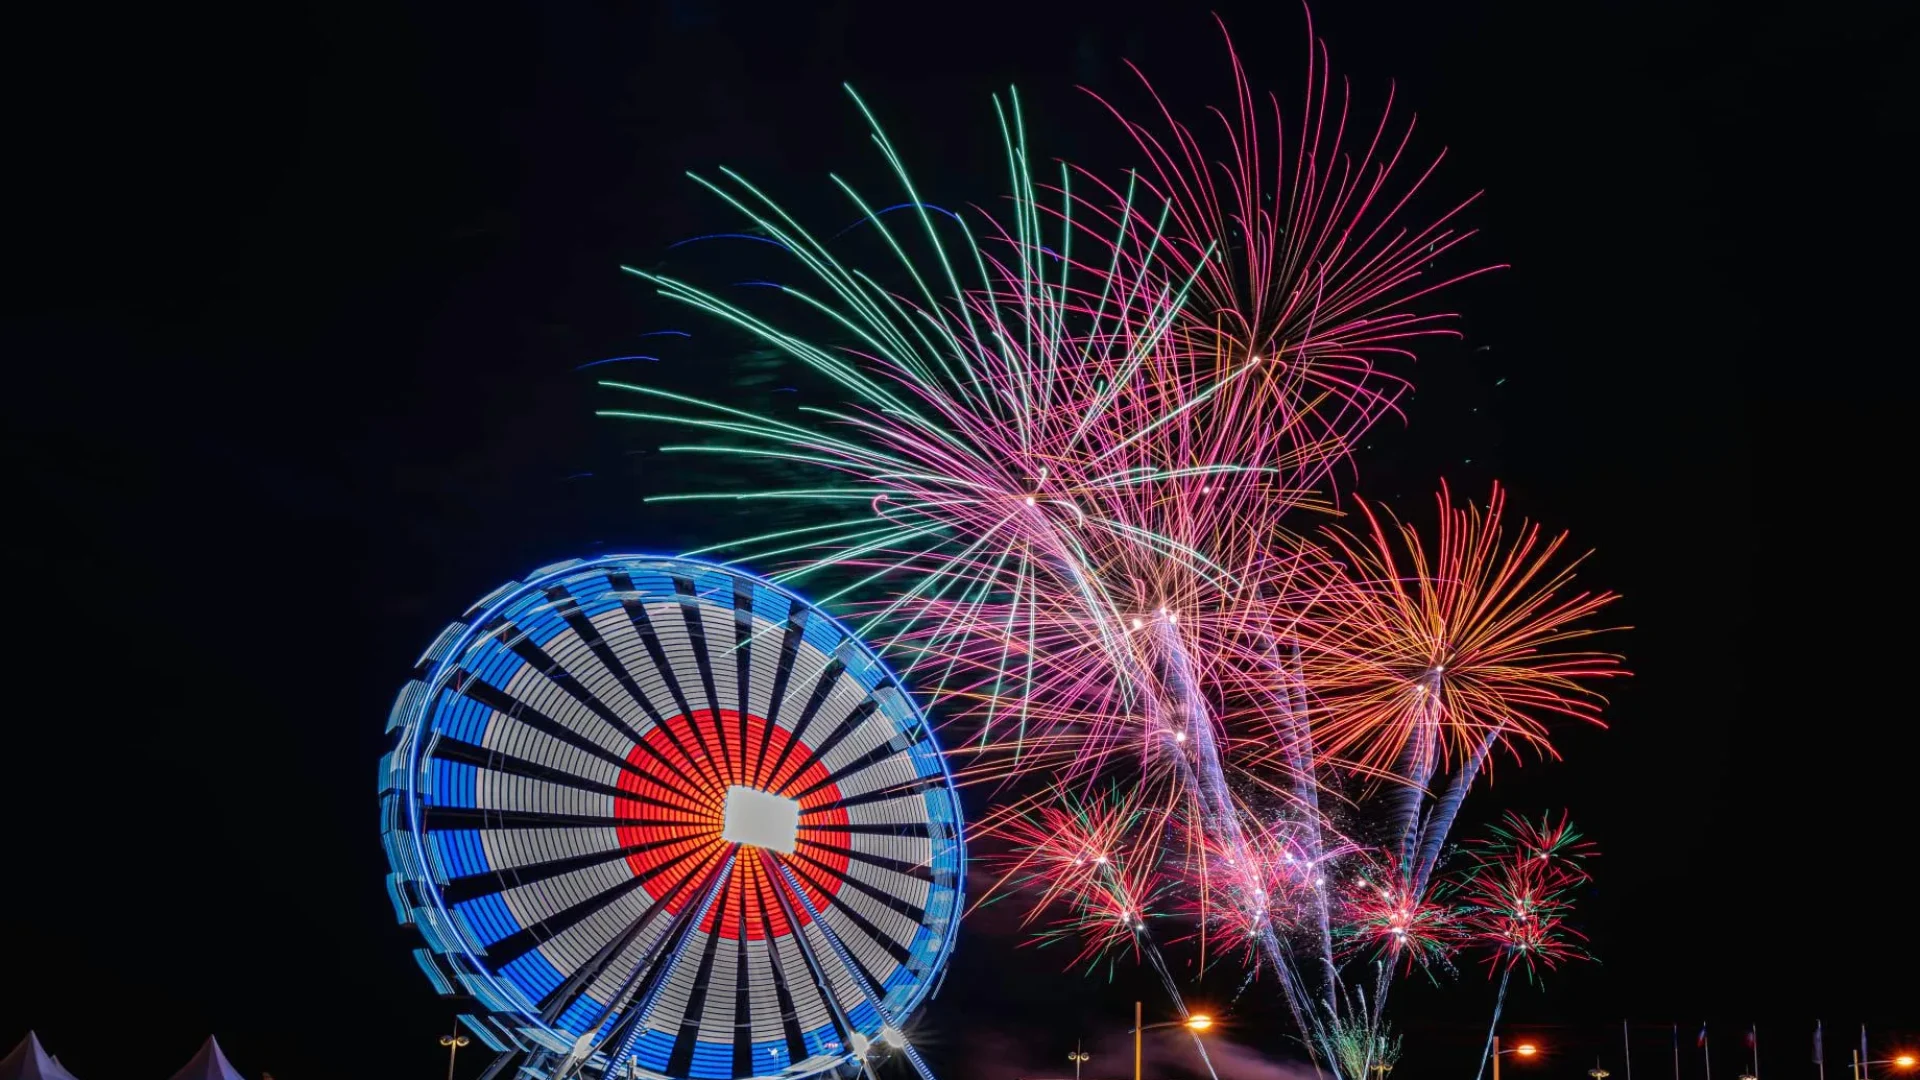 Photo of fireworks in Saint Jean de Monts with the big wheel illuminated